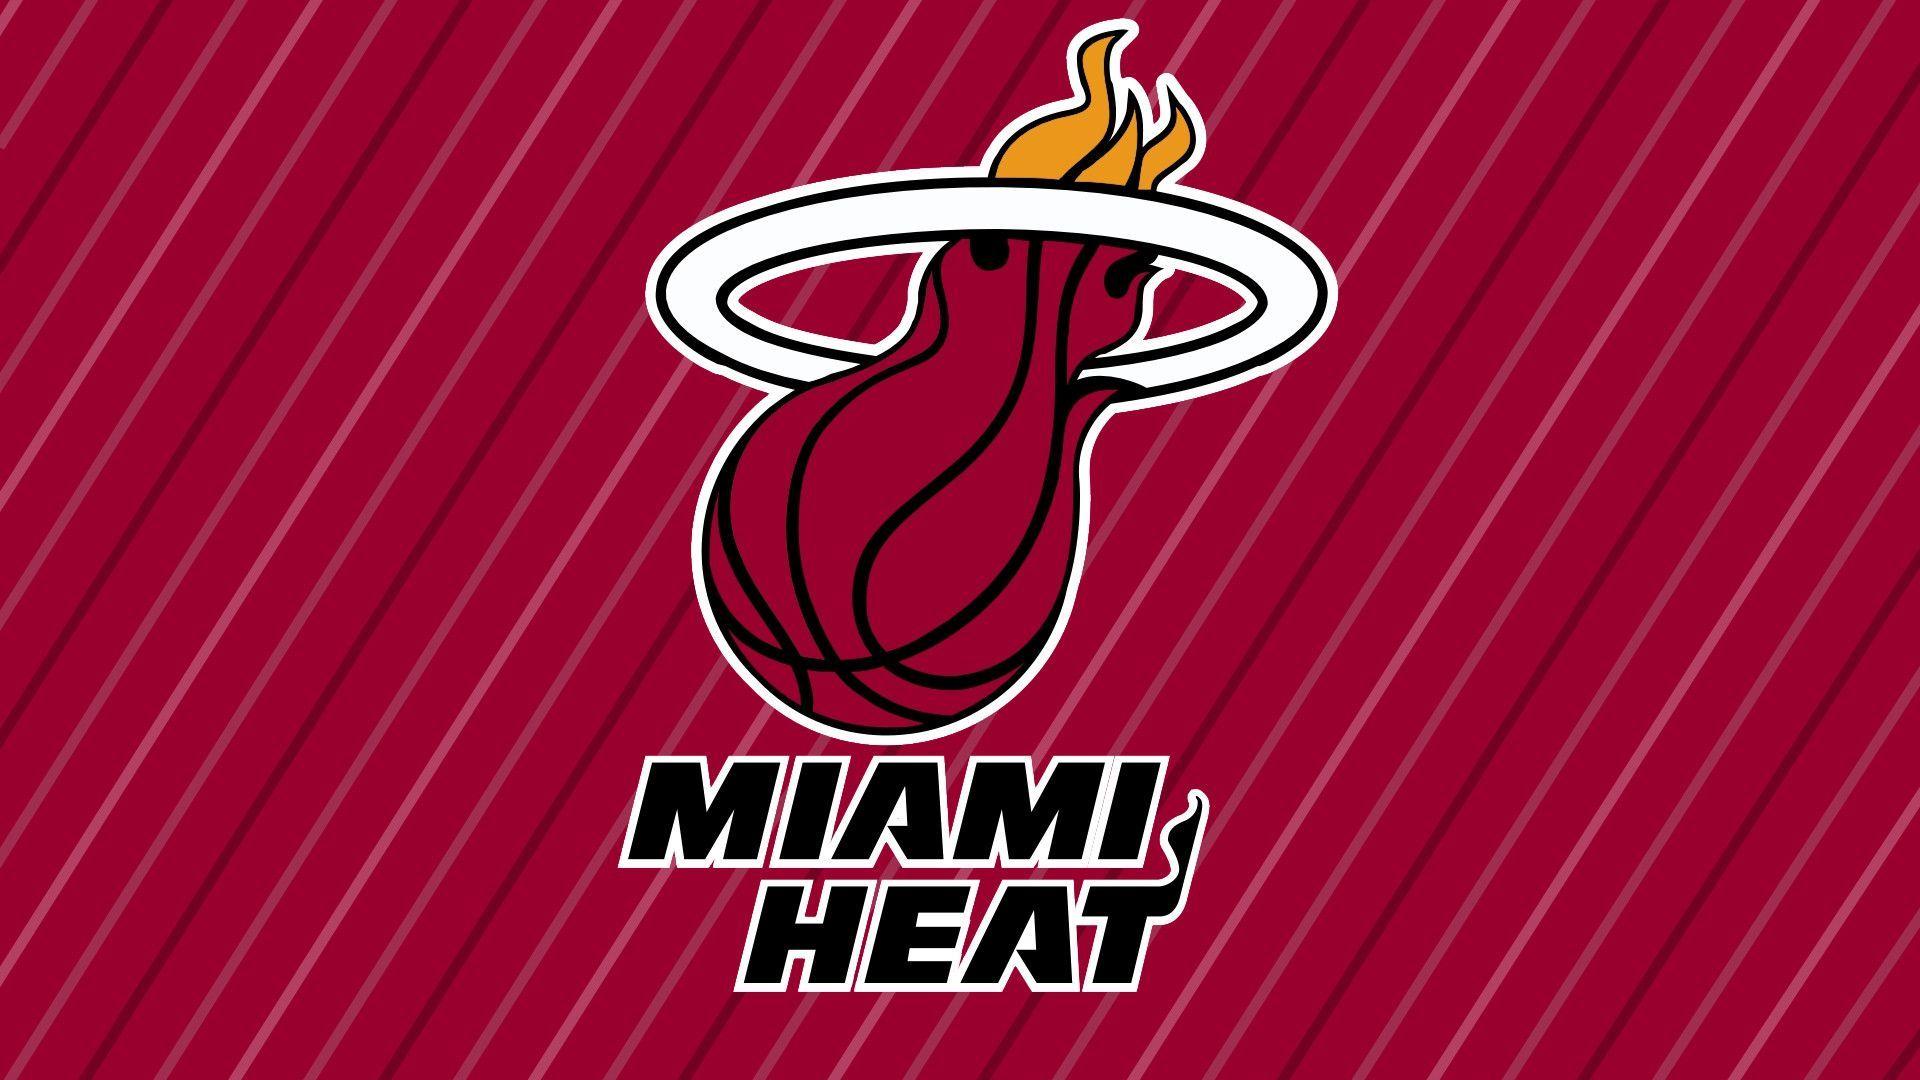 NBA Team Logo iPhone Wallpaper, Background and Themes 1920×1080